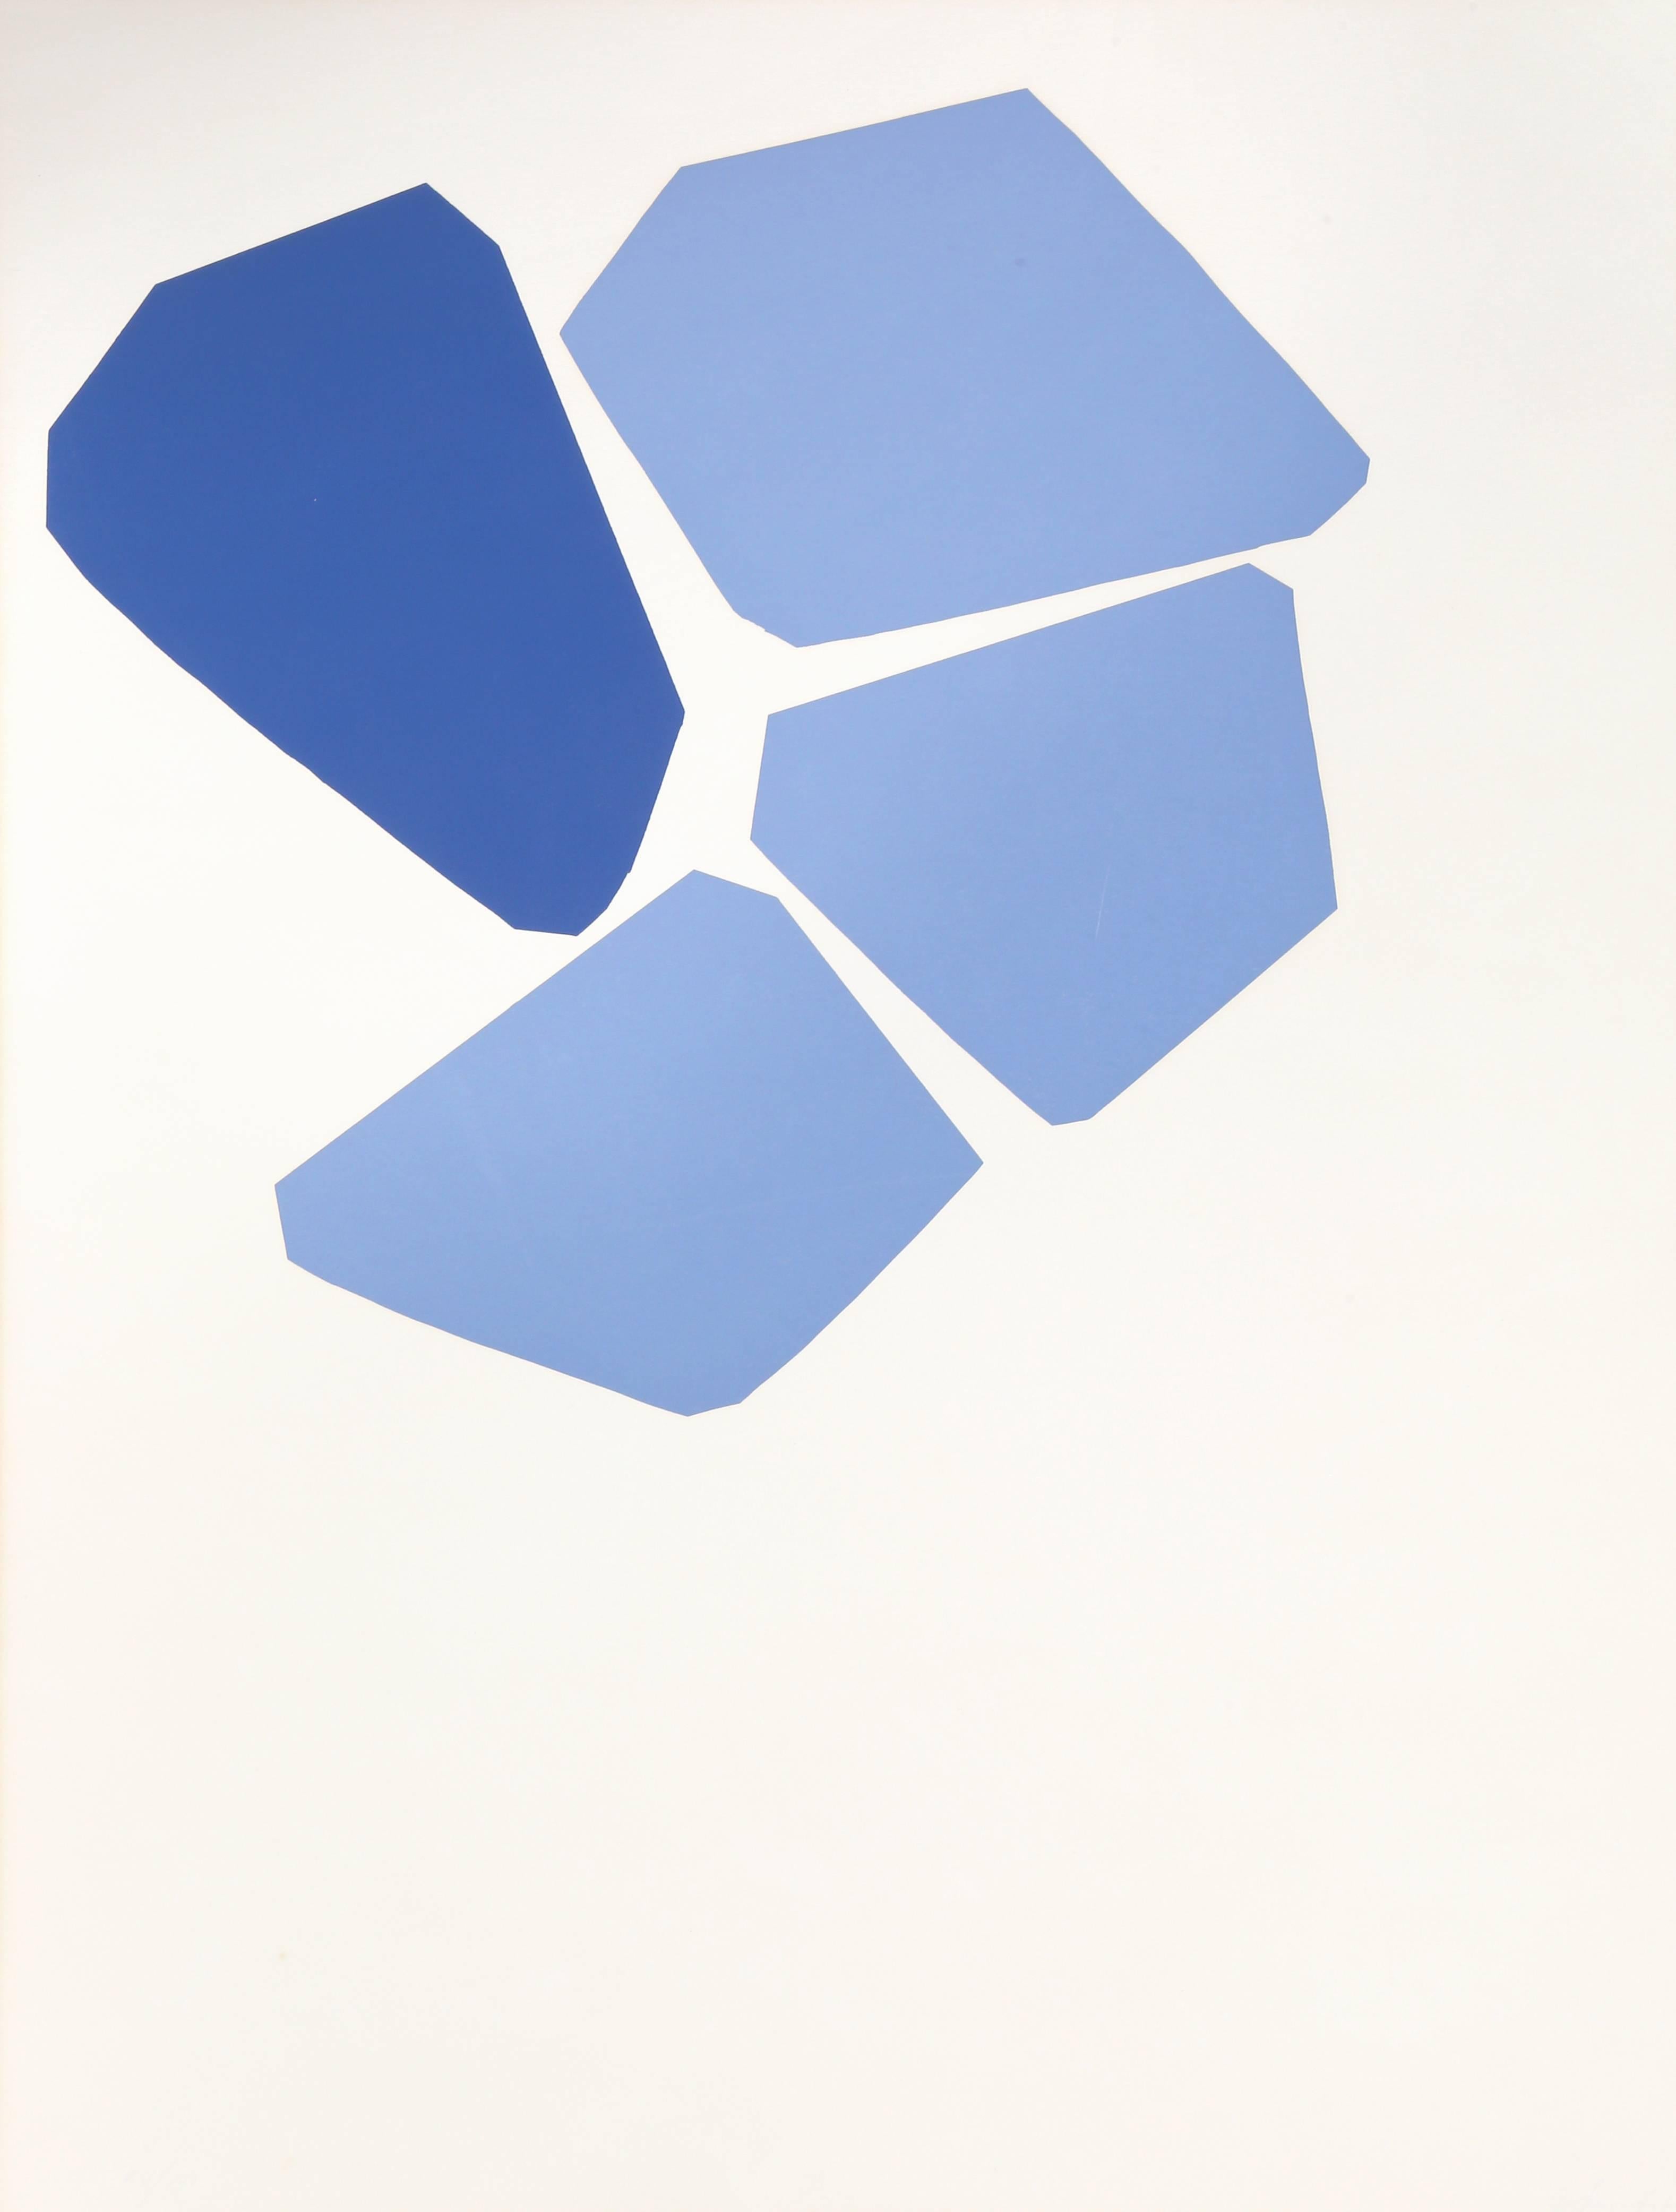 Robert Arthur Goodnough Abstract Print - Untitled - Four Shapes